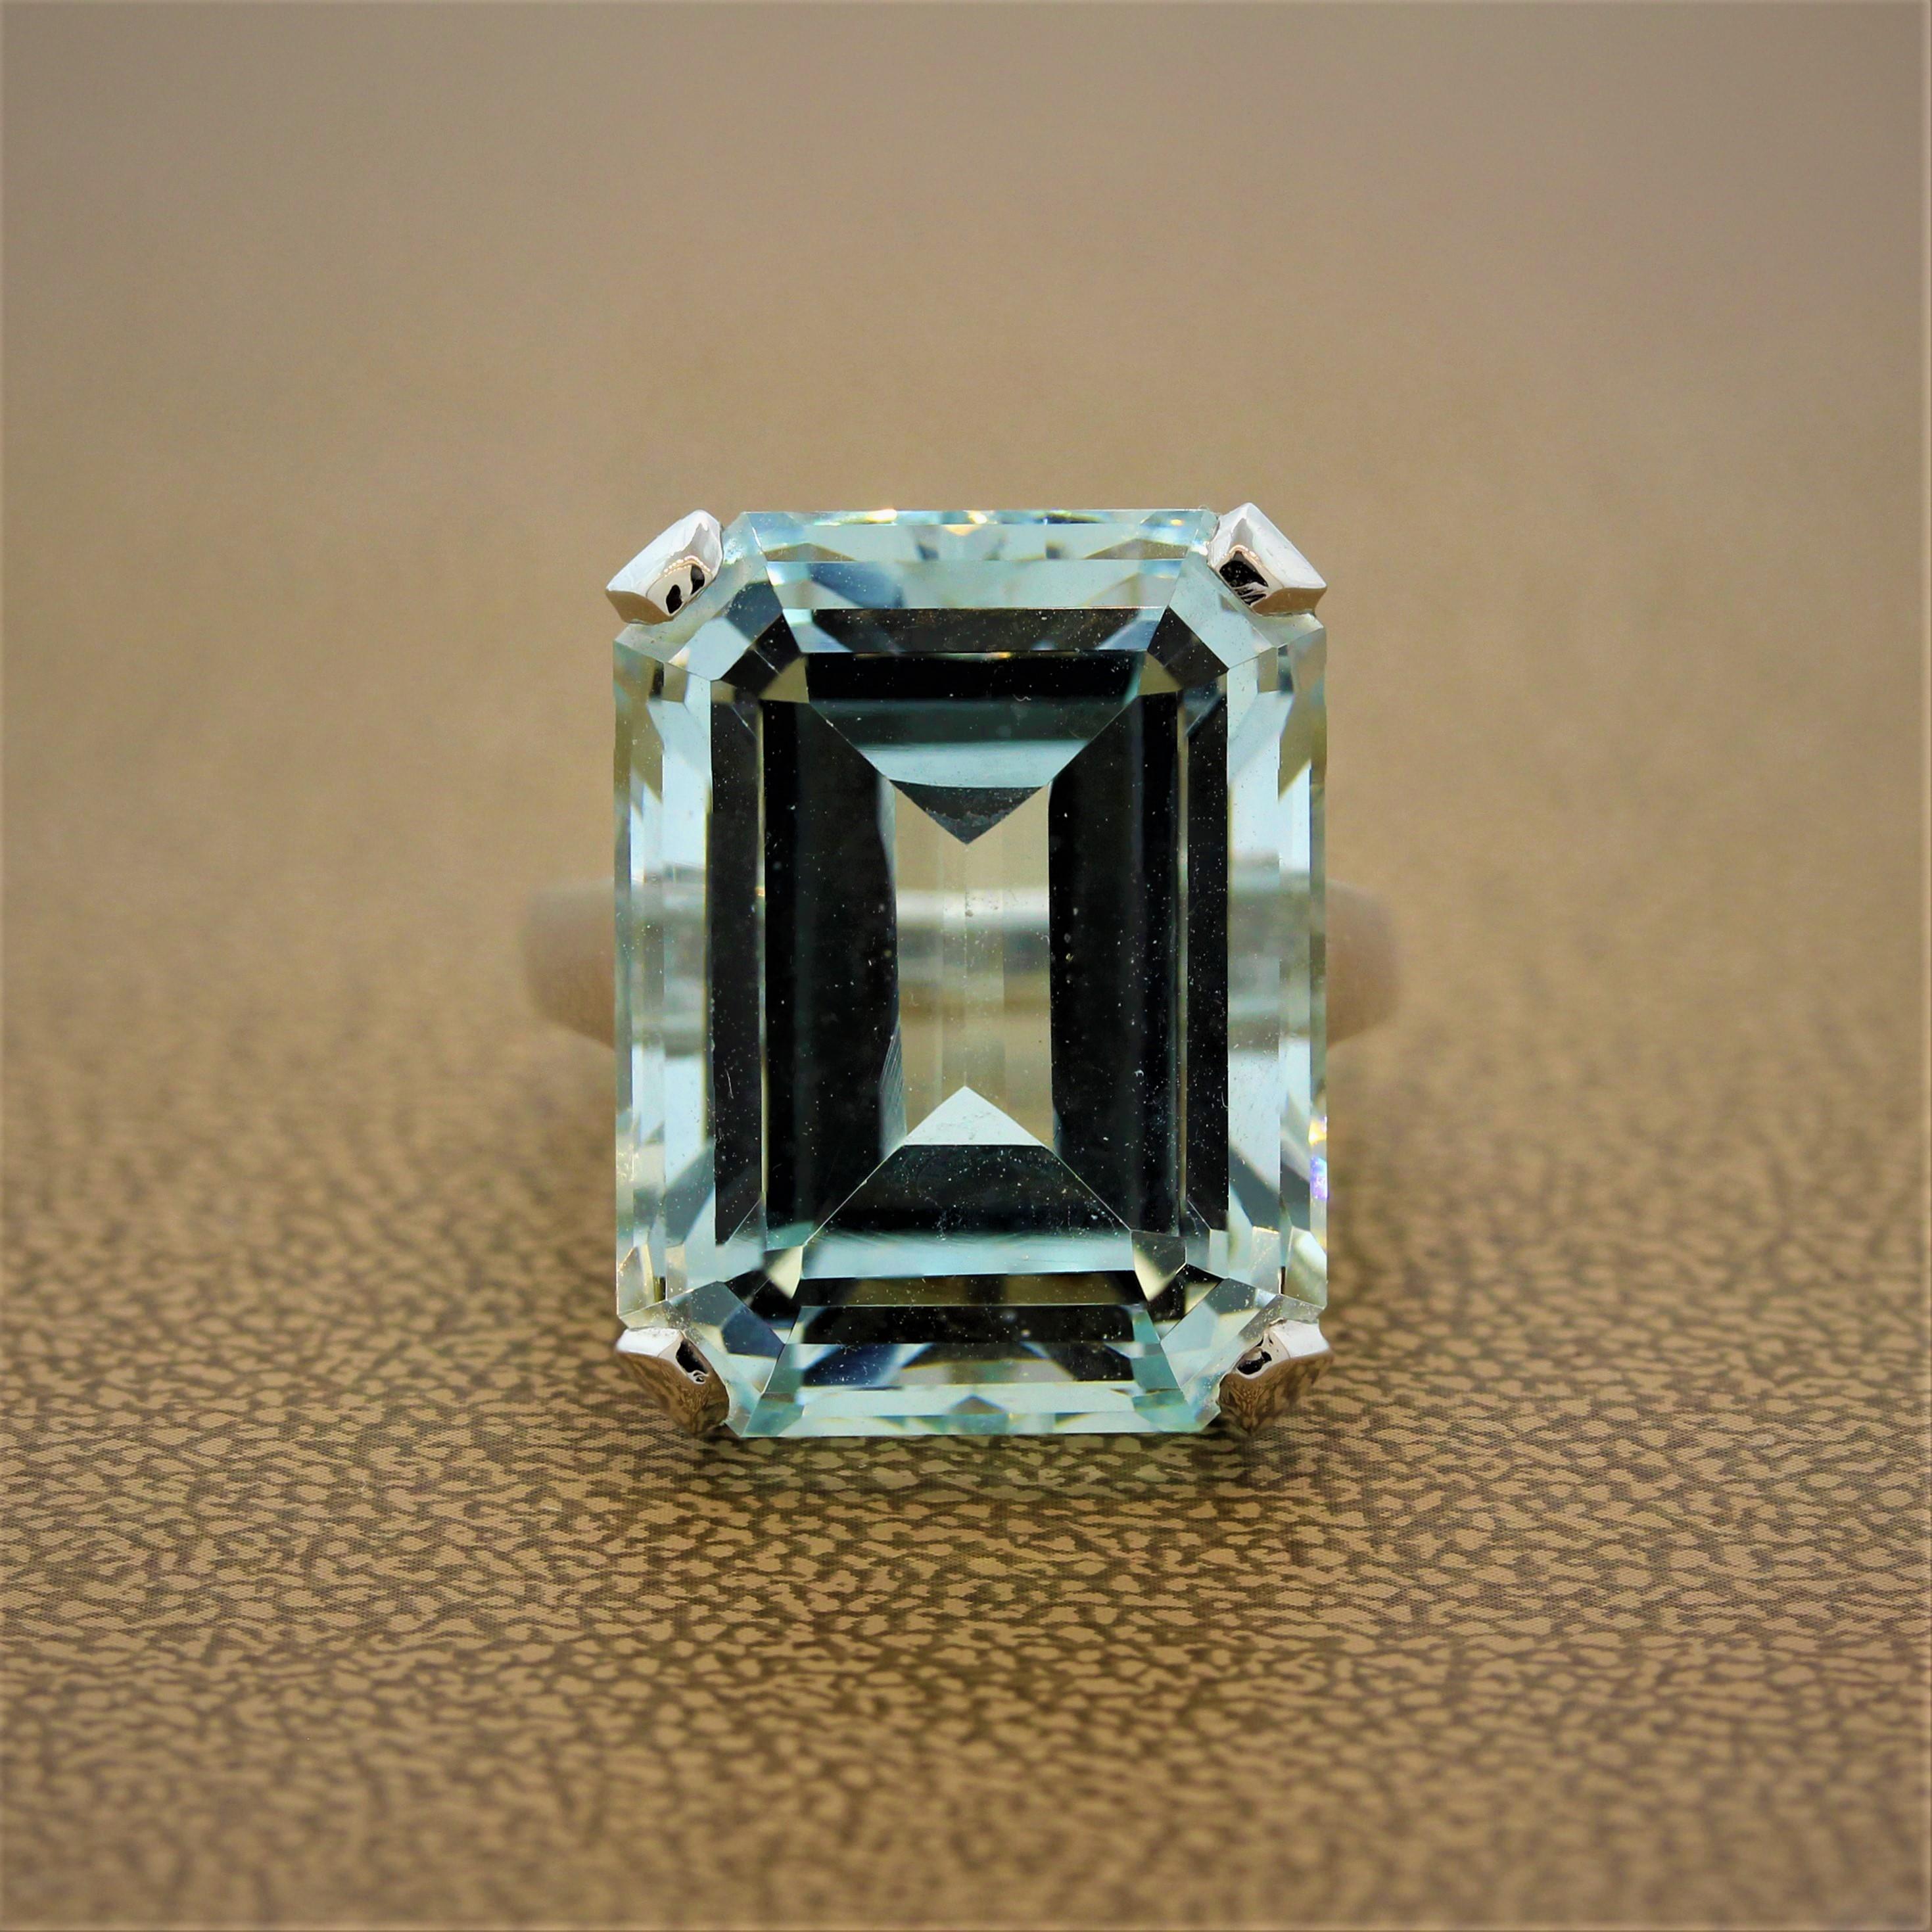 Make a statement with this estate ring featuring a 29.12 carat aquamarine. This solitaire emerald cut aquamarine is set in a 14K white gold basket setting. A versatile ring to complement any day or night outfit and can easily be dressed up or worn